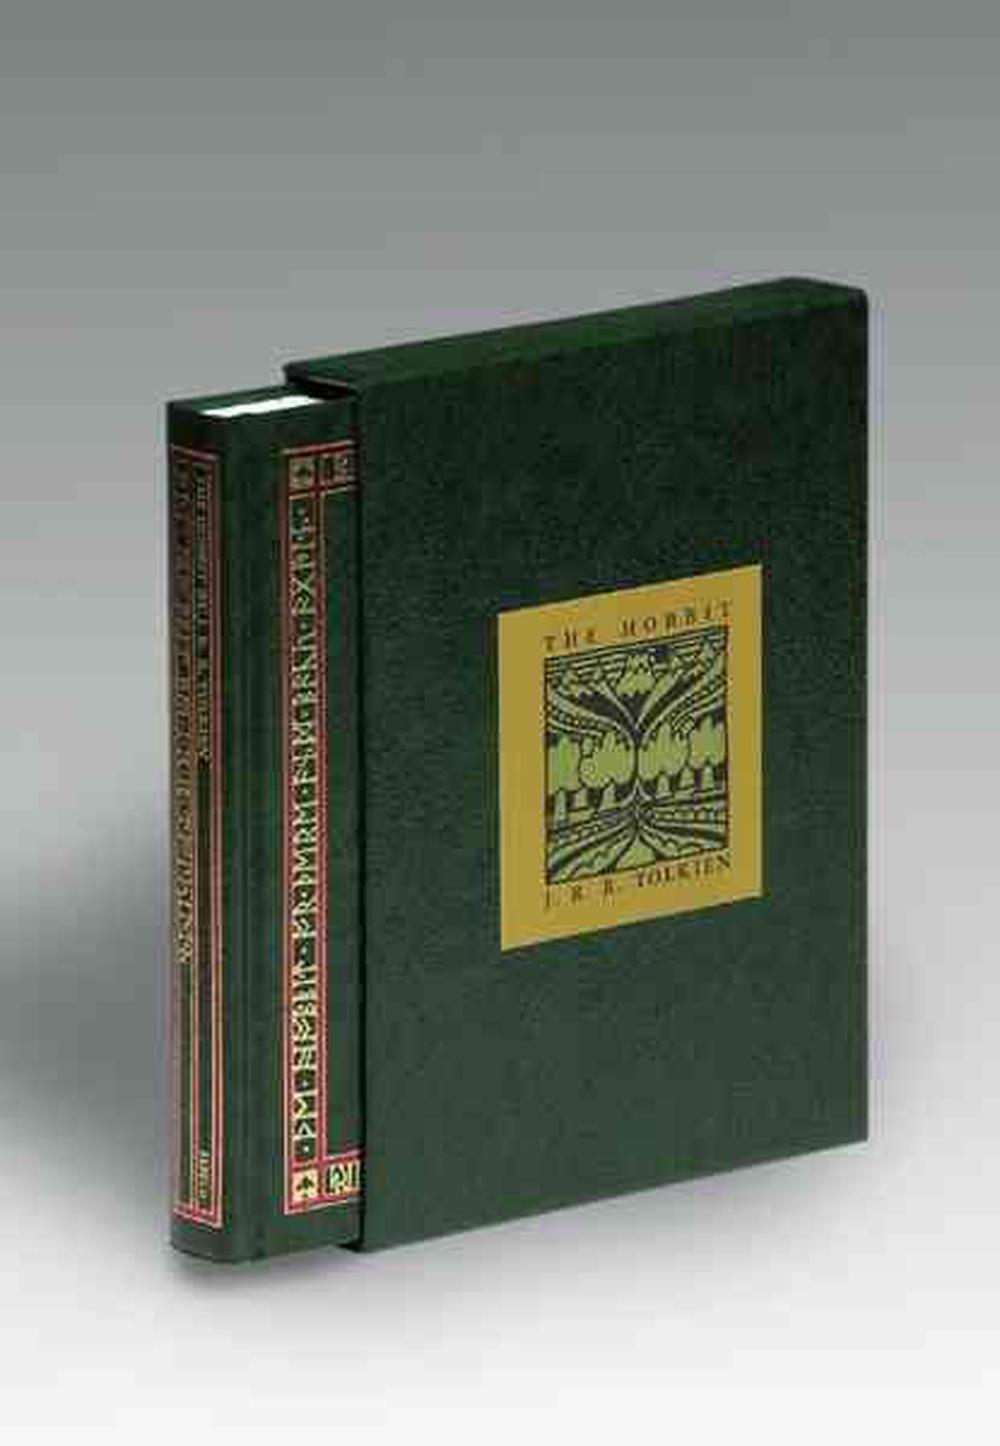 The Hobbit Or There And Back Again By Jrr Tolkien English Hardcover Book F 9780395177112 5132